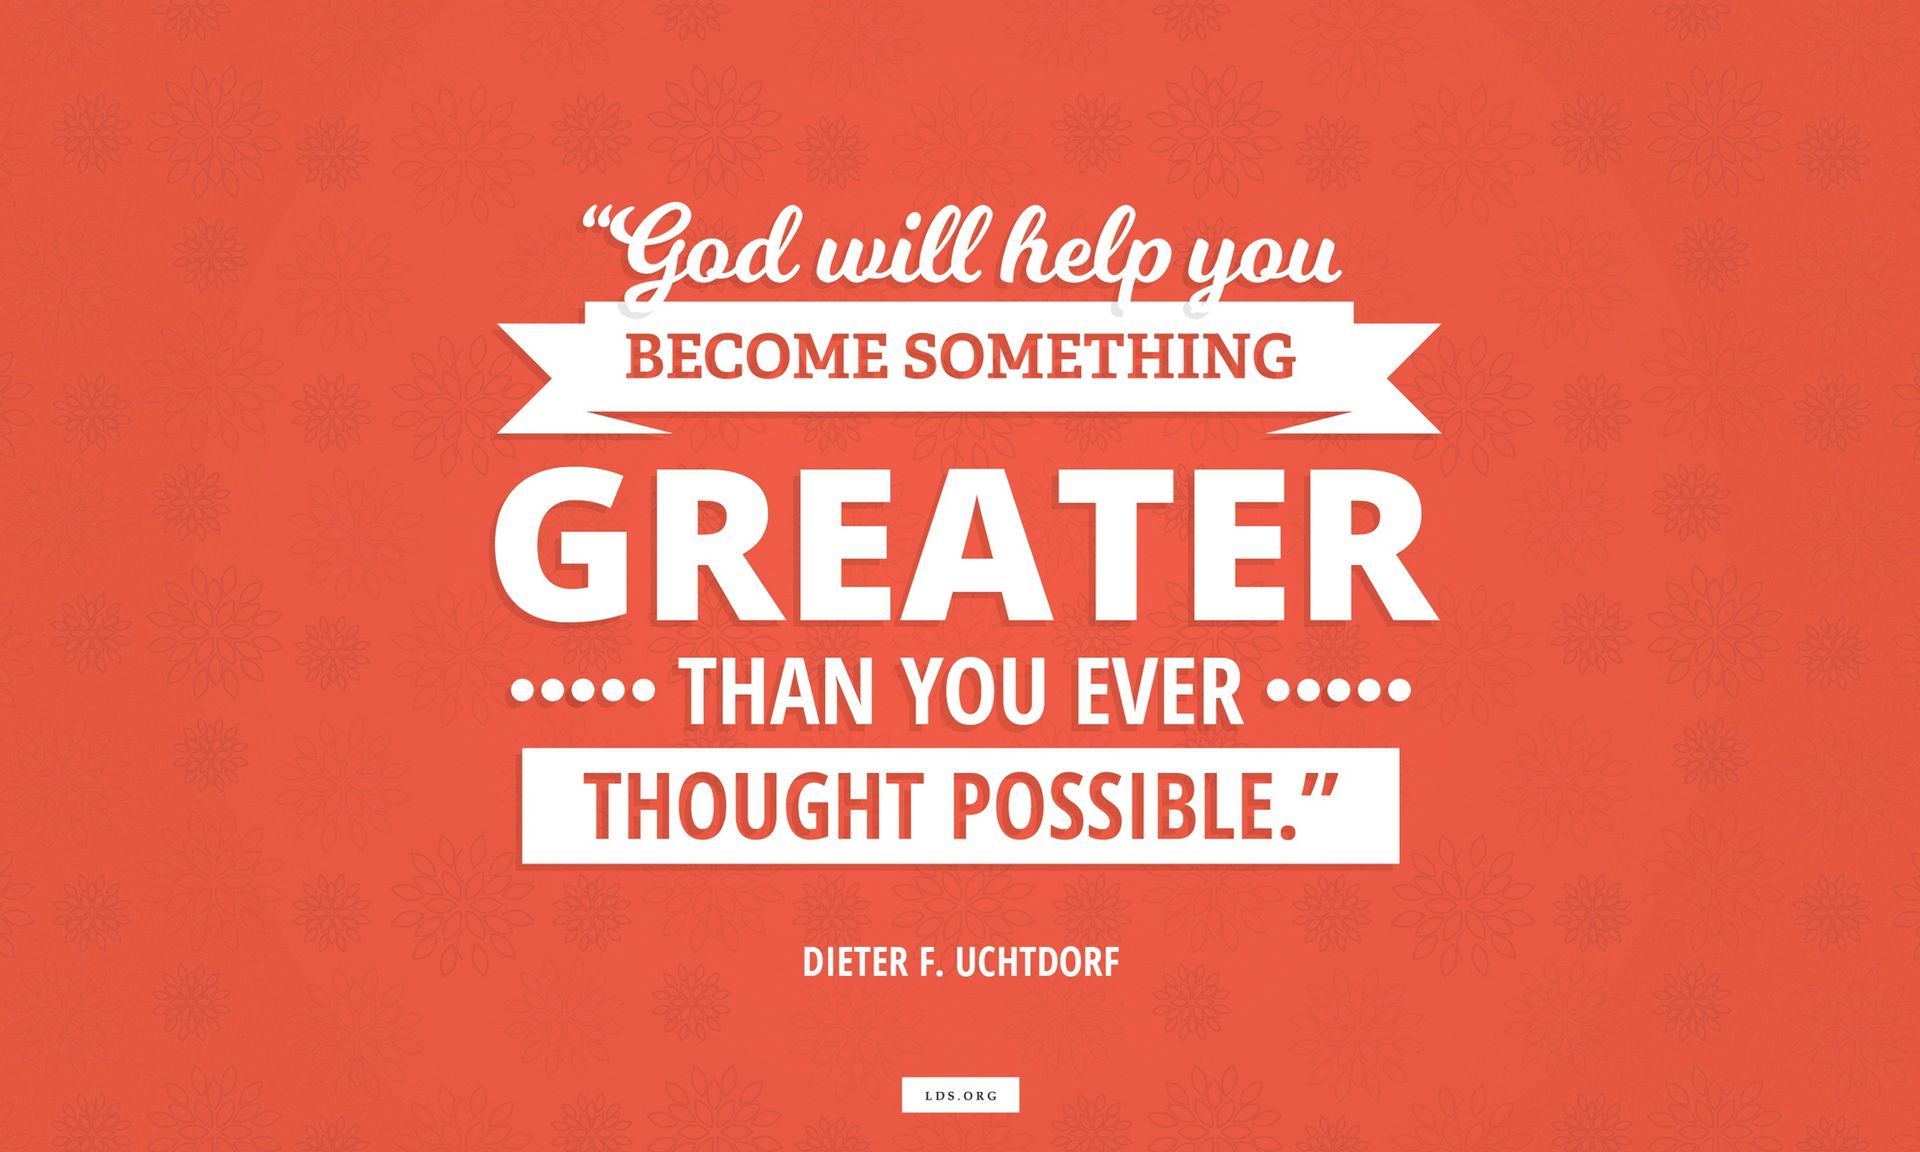 “God will help you become something greater than you ever thought possible.”—President Dieter F. Uchtdorf, “It Works Wonderfully”